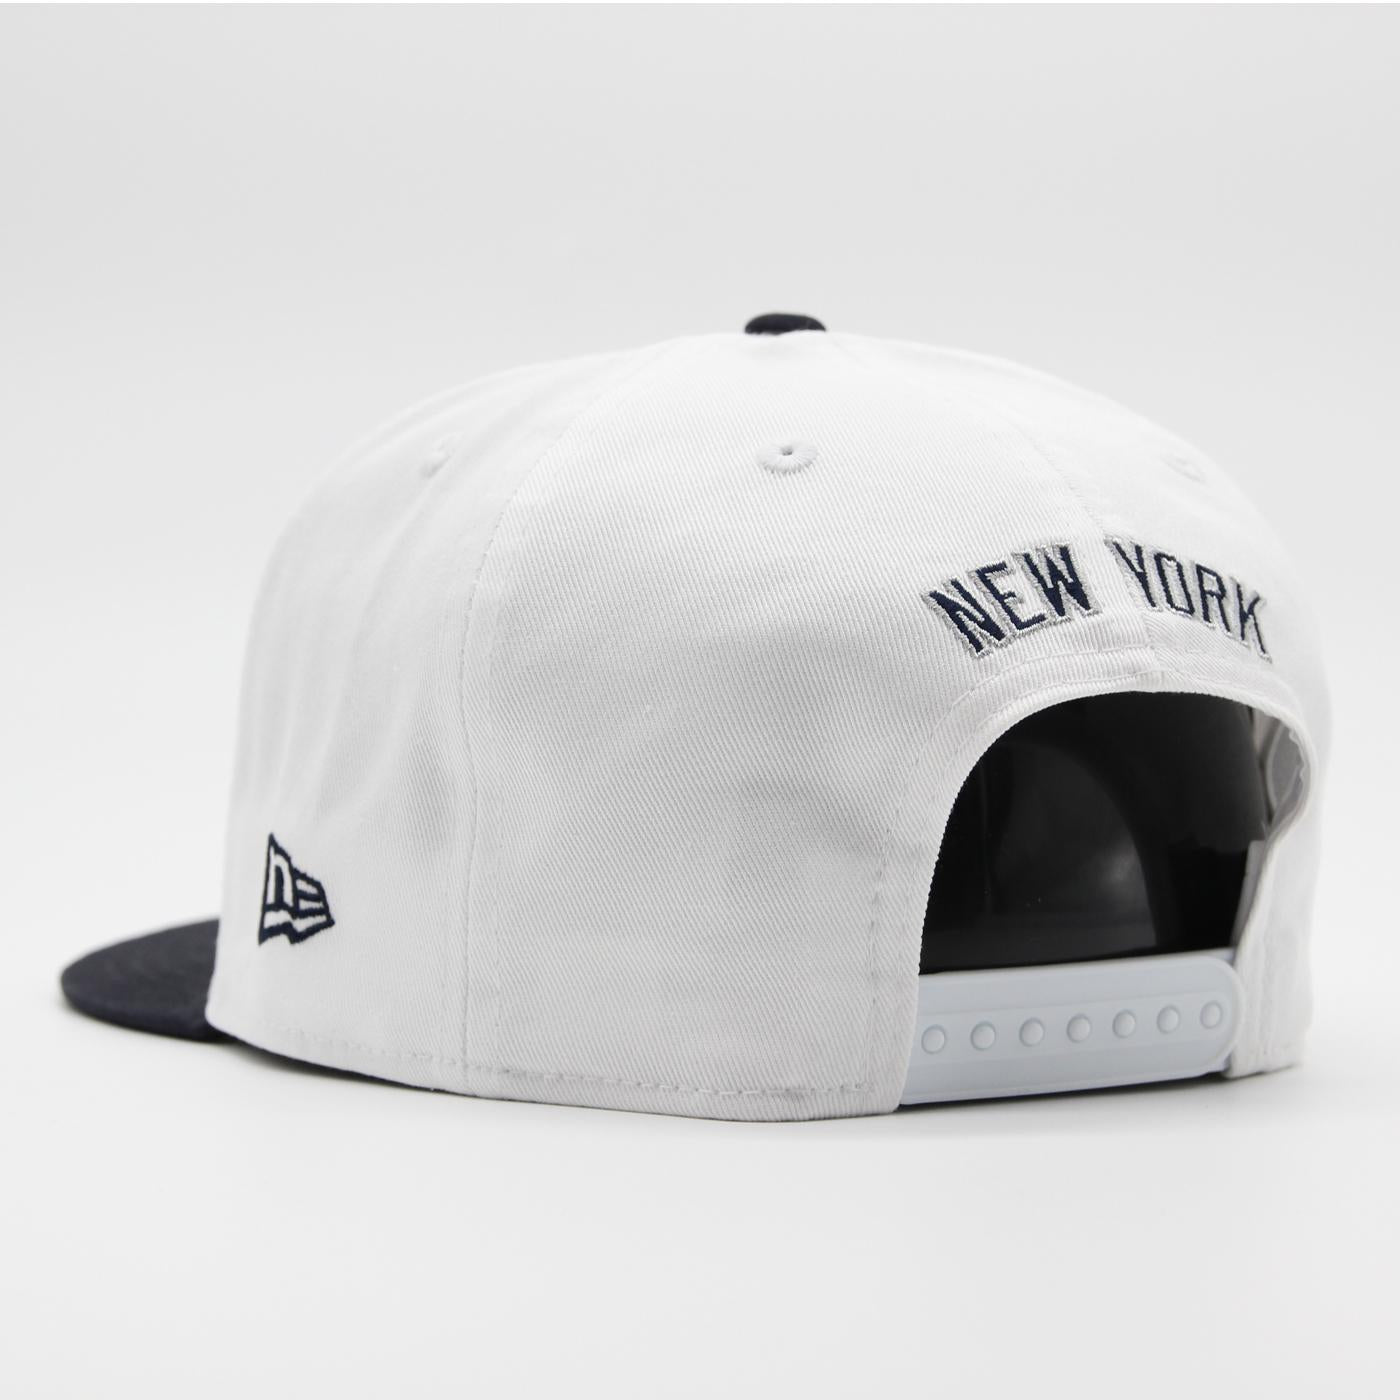 New Era Crown Patches white 9Fifty NY Yankees white/navy